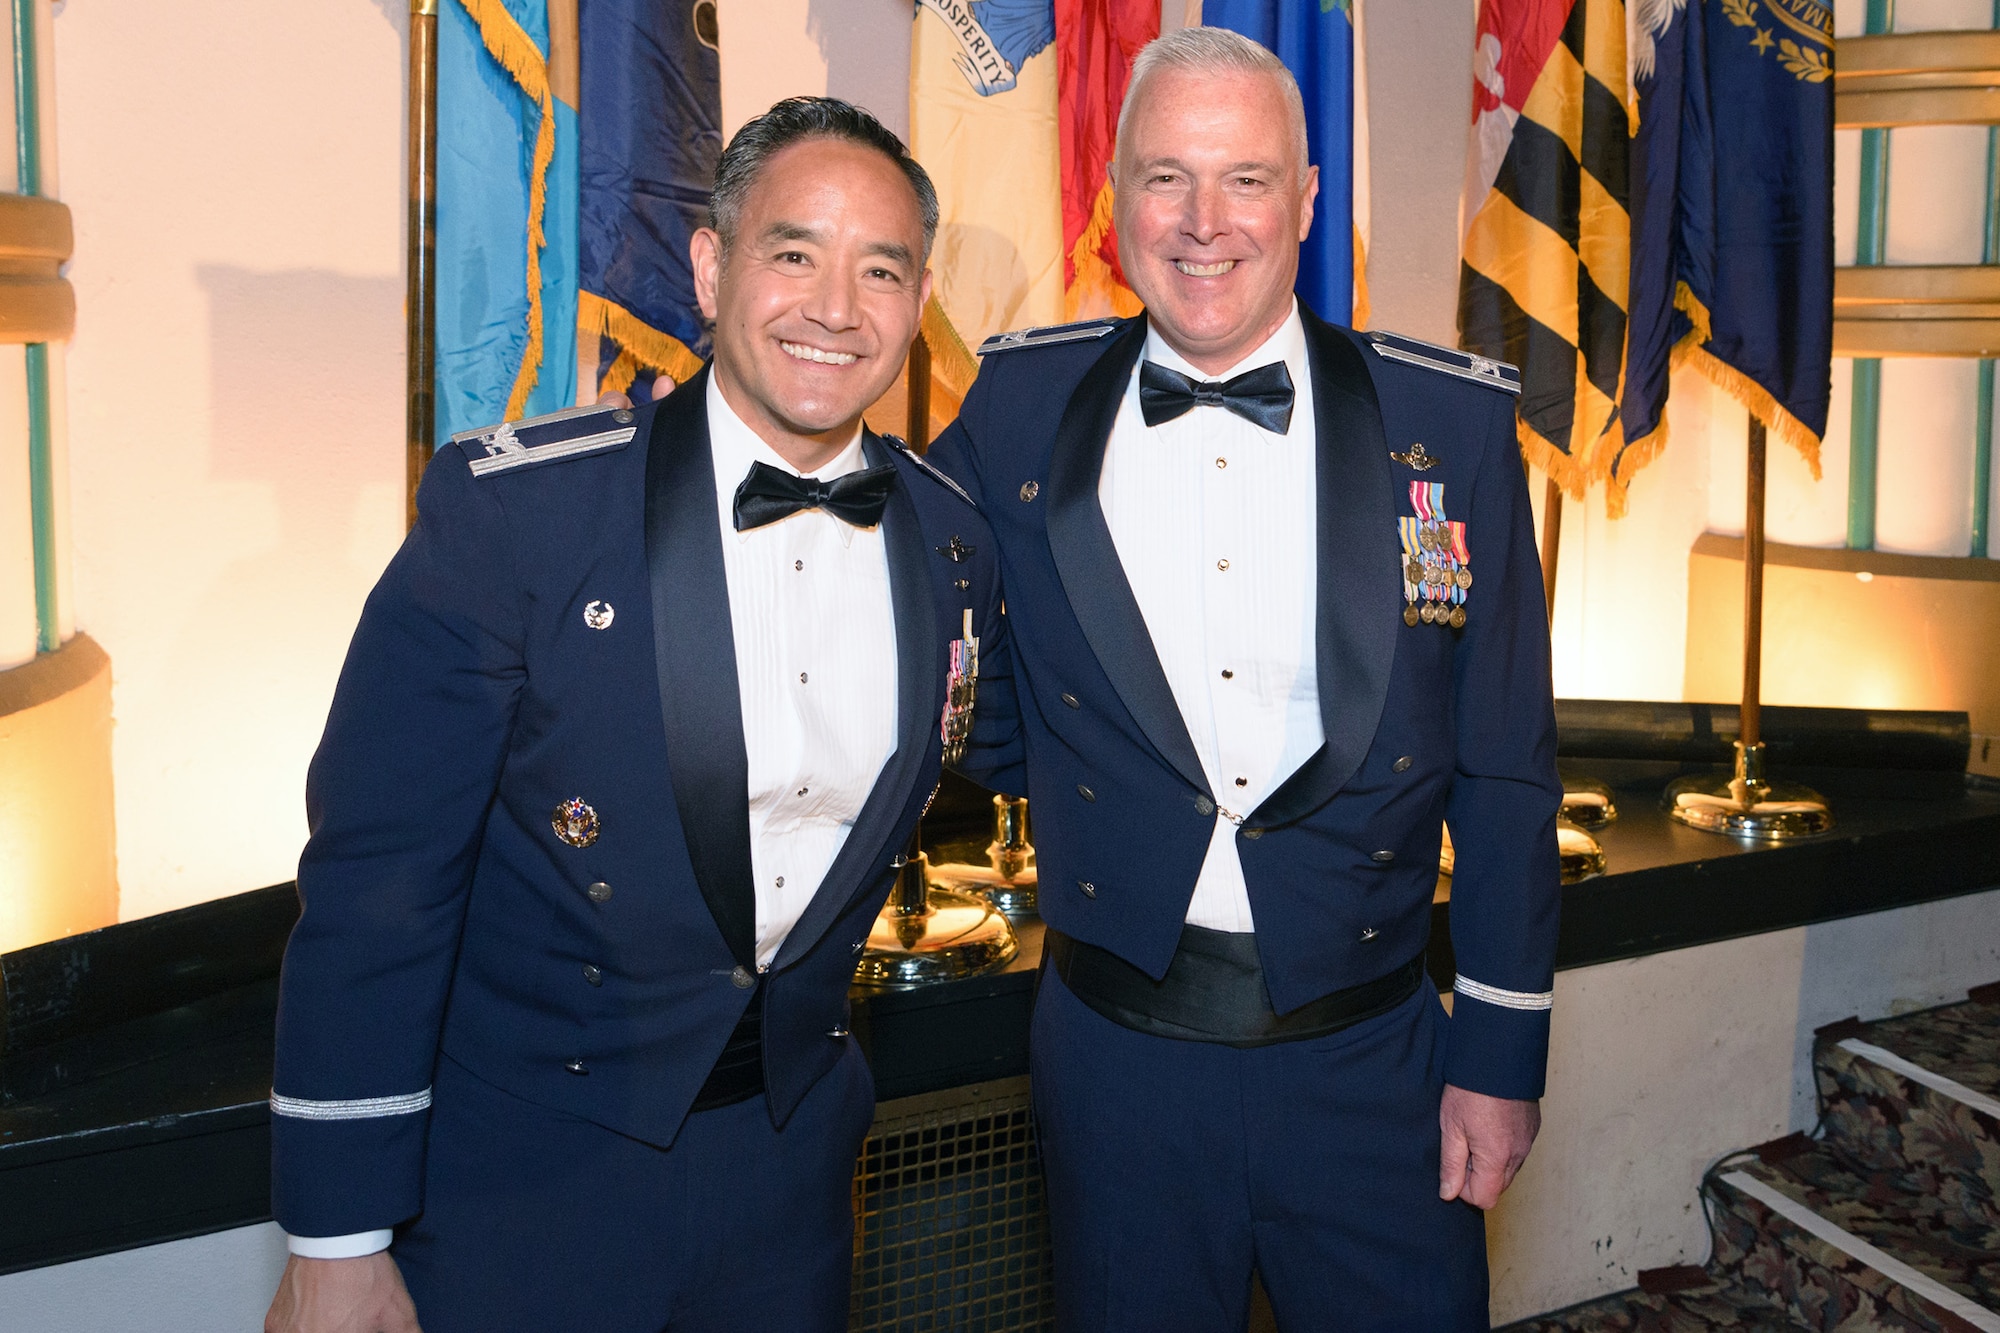 Col. David Kumashiro (left), 62nd Airlift Wing commander, and Col. Scott McLaughlin, 446th Airlift Wing commander, epitomize the working relationship between their respective units before the dinner portion of the 2015 446th Airlift Wing Awards Banquet at the Landmark Convention Center, Tacoma, April 11. The event was to honor the wing's quarterly and annual award recipients from 2014. (Courtesy photo by David Lobban Photography)